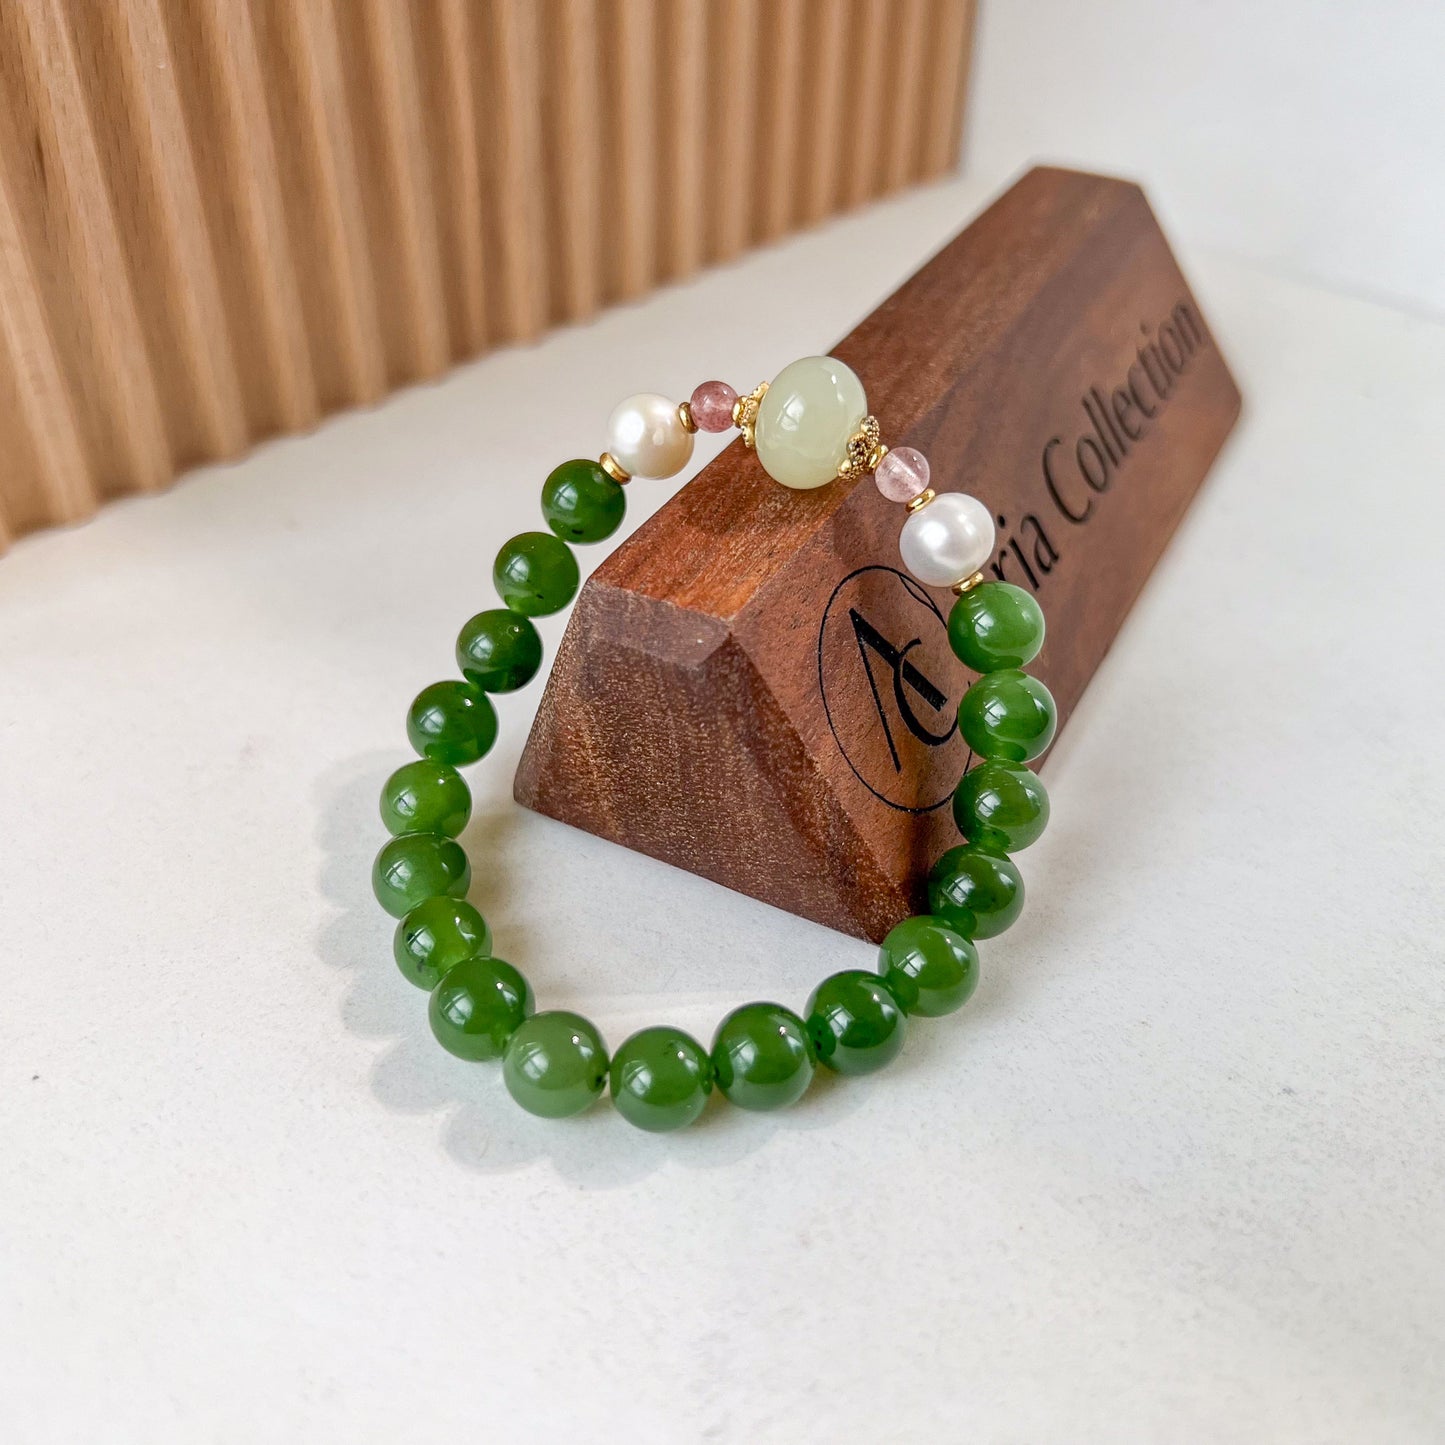 8 mm Green Nephrite Jade with Freshwater Pearls Round Beaded Bracelet, HST-0722-1705530276